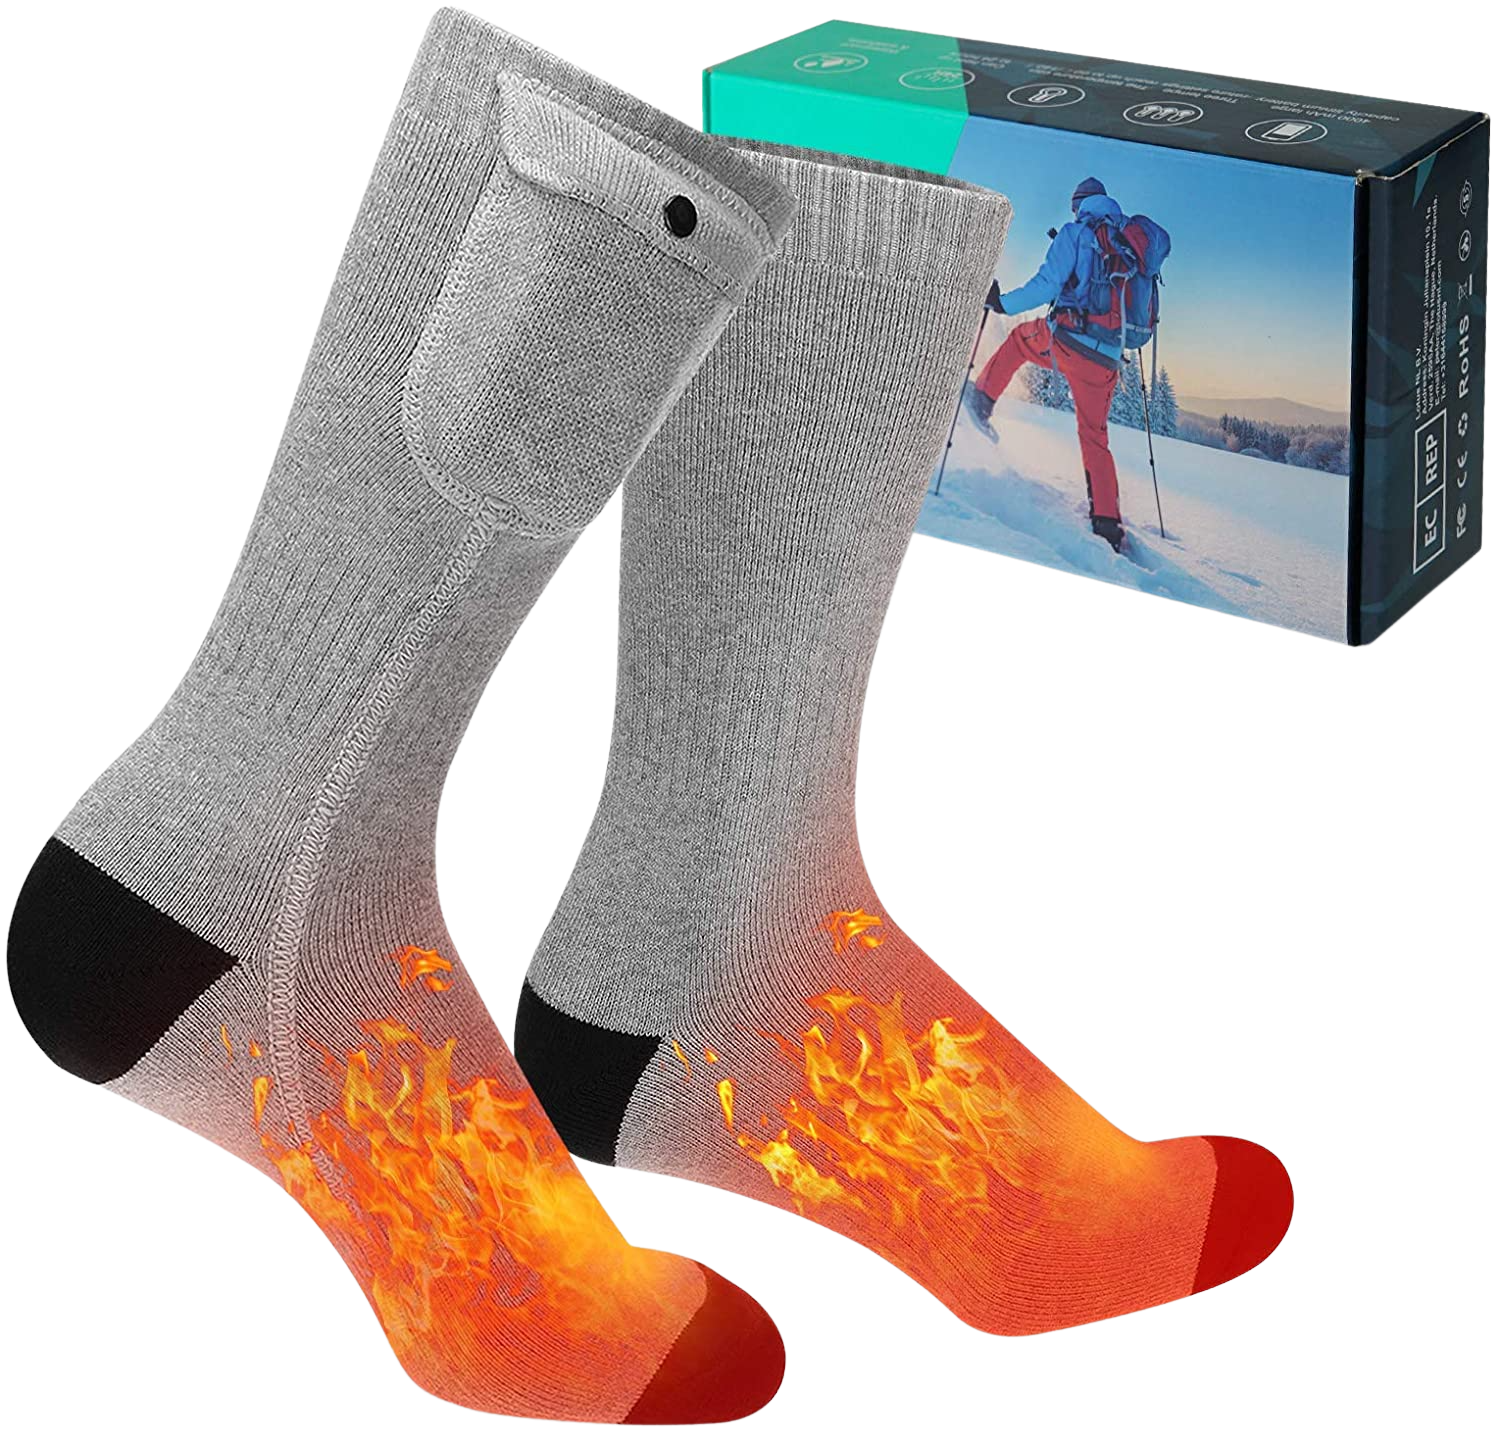 MECO Heated Socks, Winter Socks for Men Women 3.7V 4000mAh Battery Powered, 3 Heating Settings Rechargeable Electric Heated Socks, Winter Warm Socks for Skiing Camping Running Fishing, L - Home Decor Gifts and More